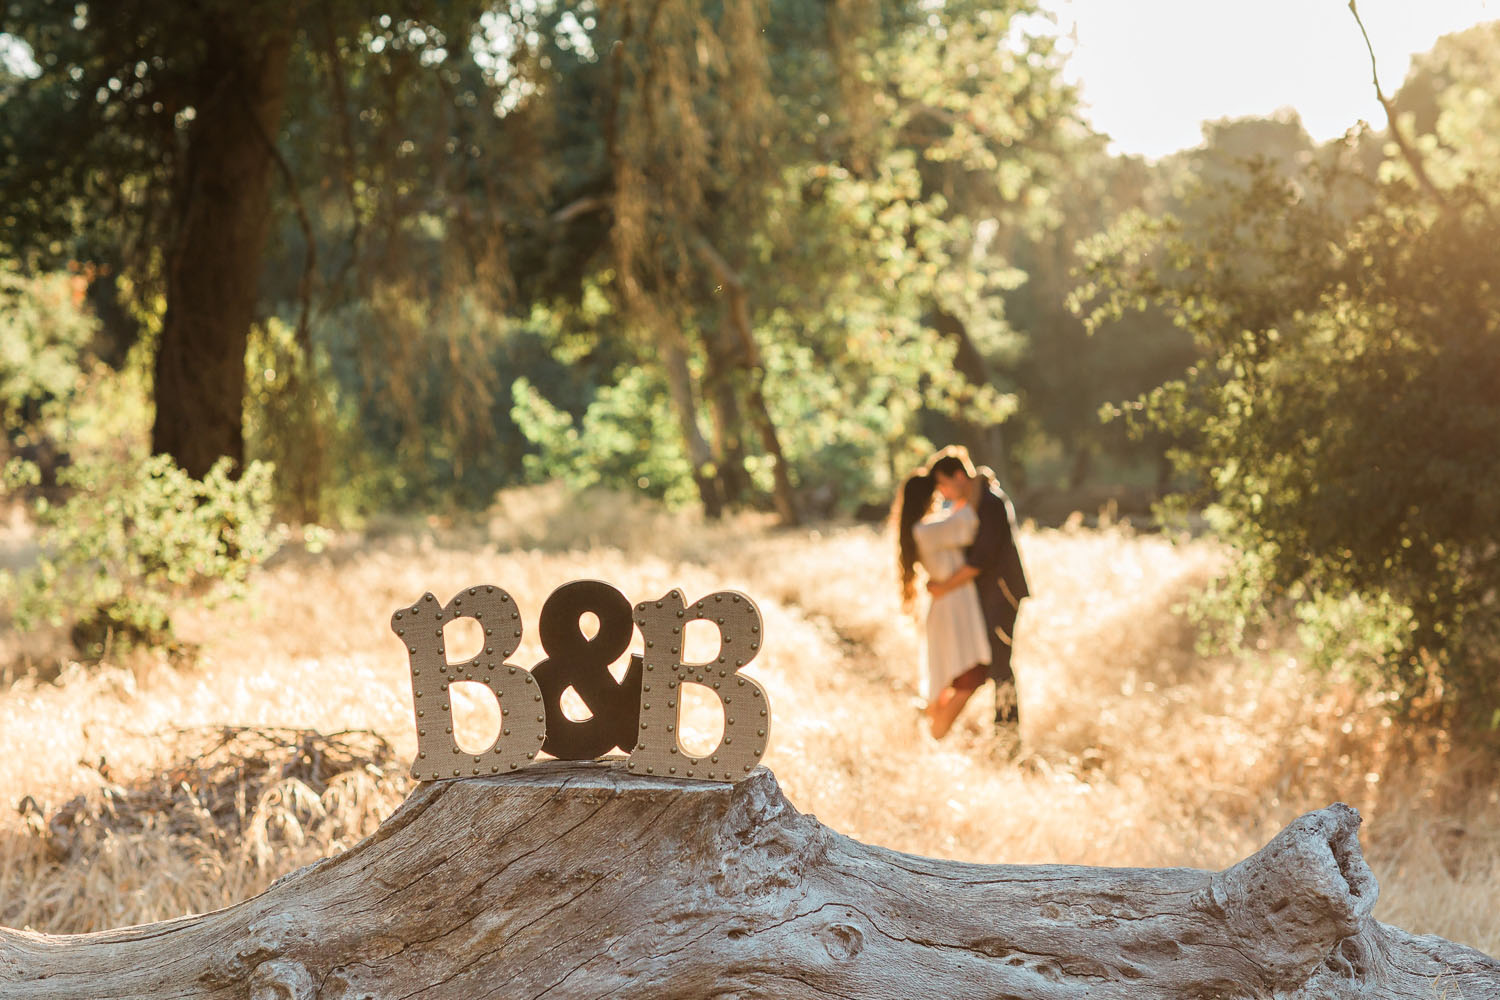 Brittany and Brett Engaged - Placerita Canyon Engagement Session Photography - How He Asked